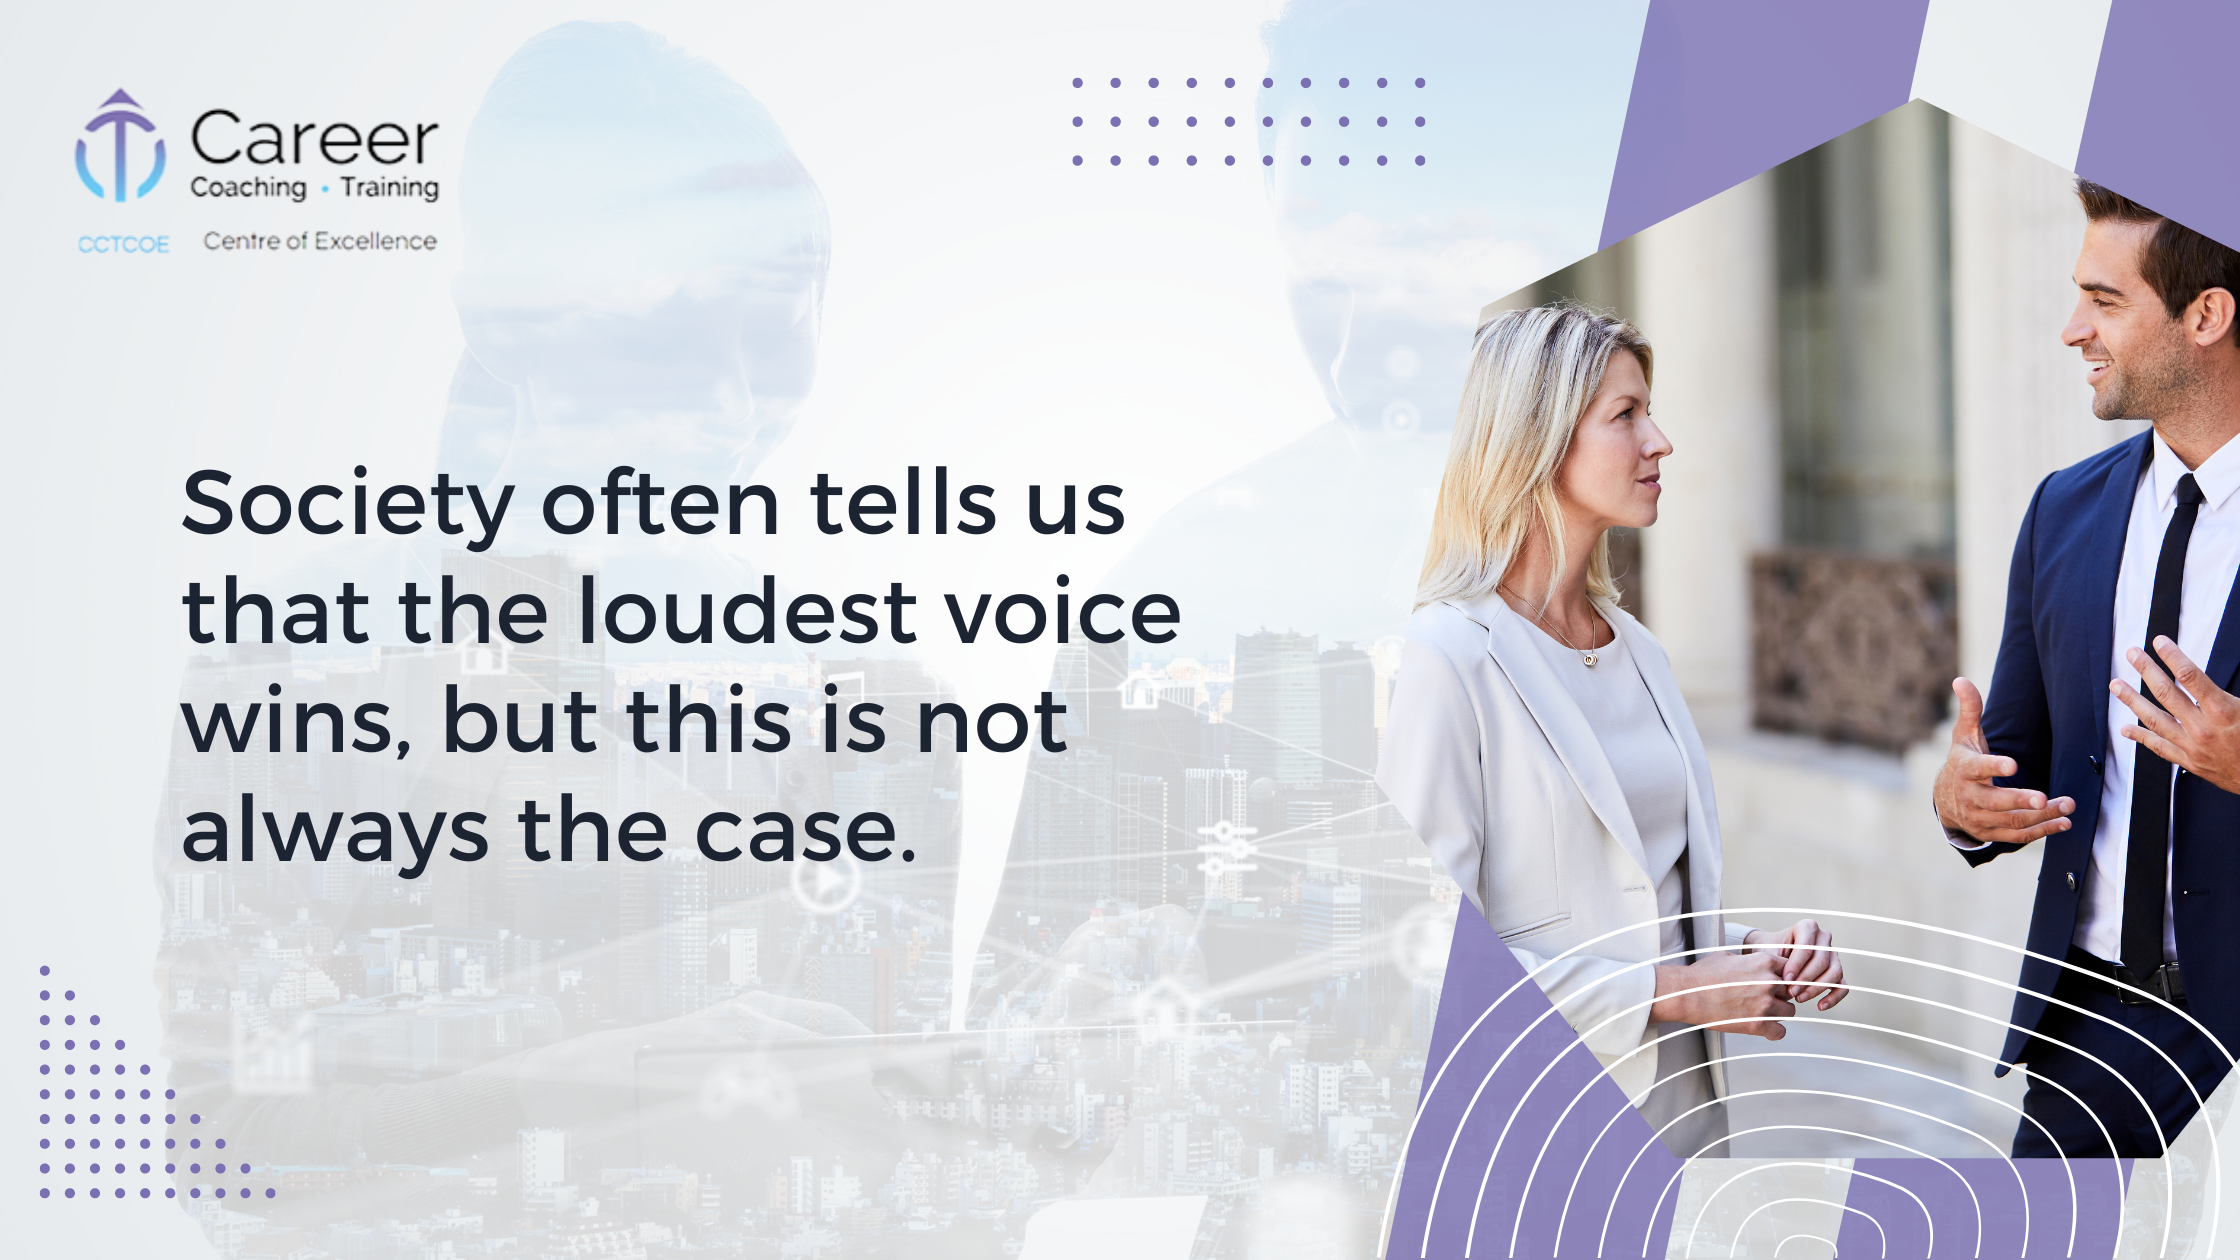 Society often tells us that the loudest voice wins, but this is not always the case.